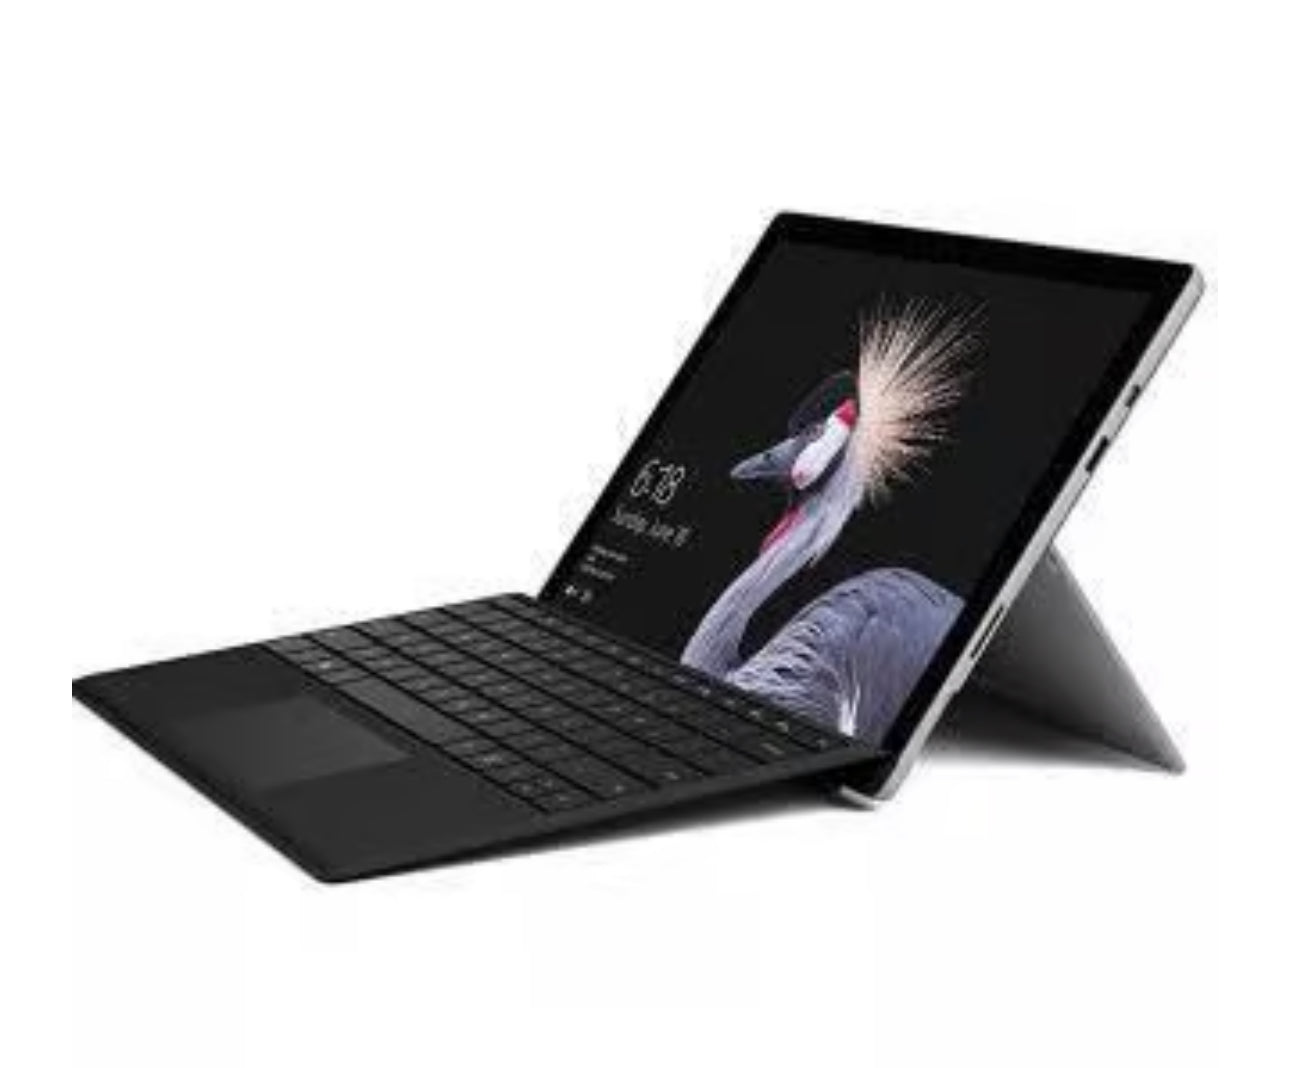 MICROSOFT SURFACE PRO 4 12.3" Touch M3-6Y30 128GB SSD 4GB W10P